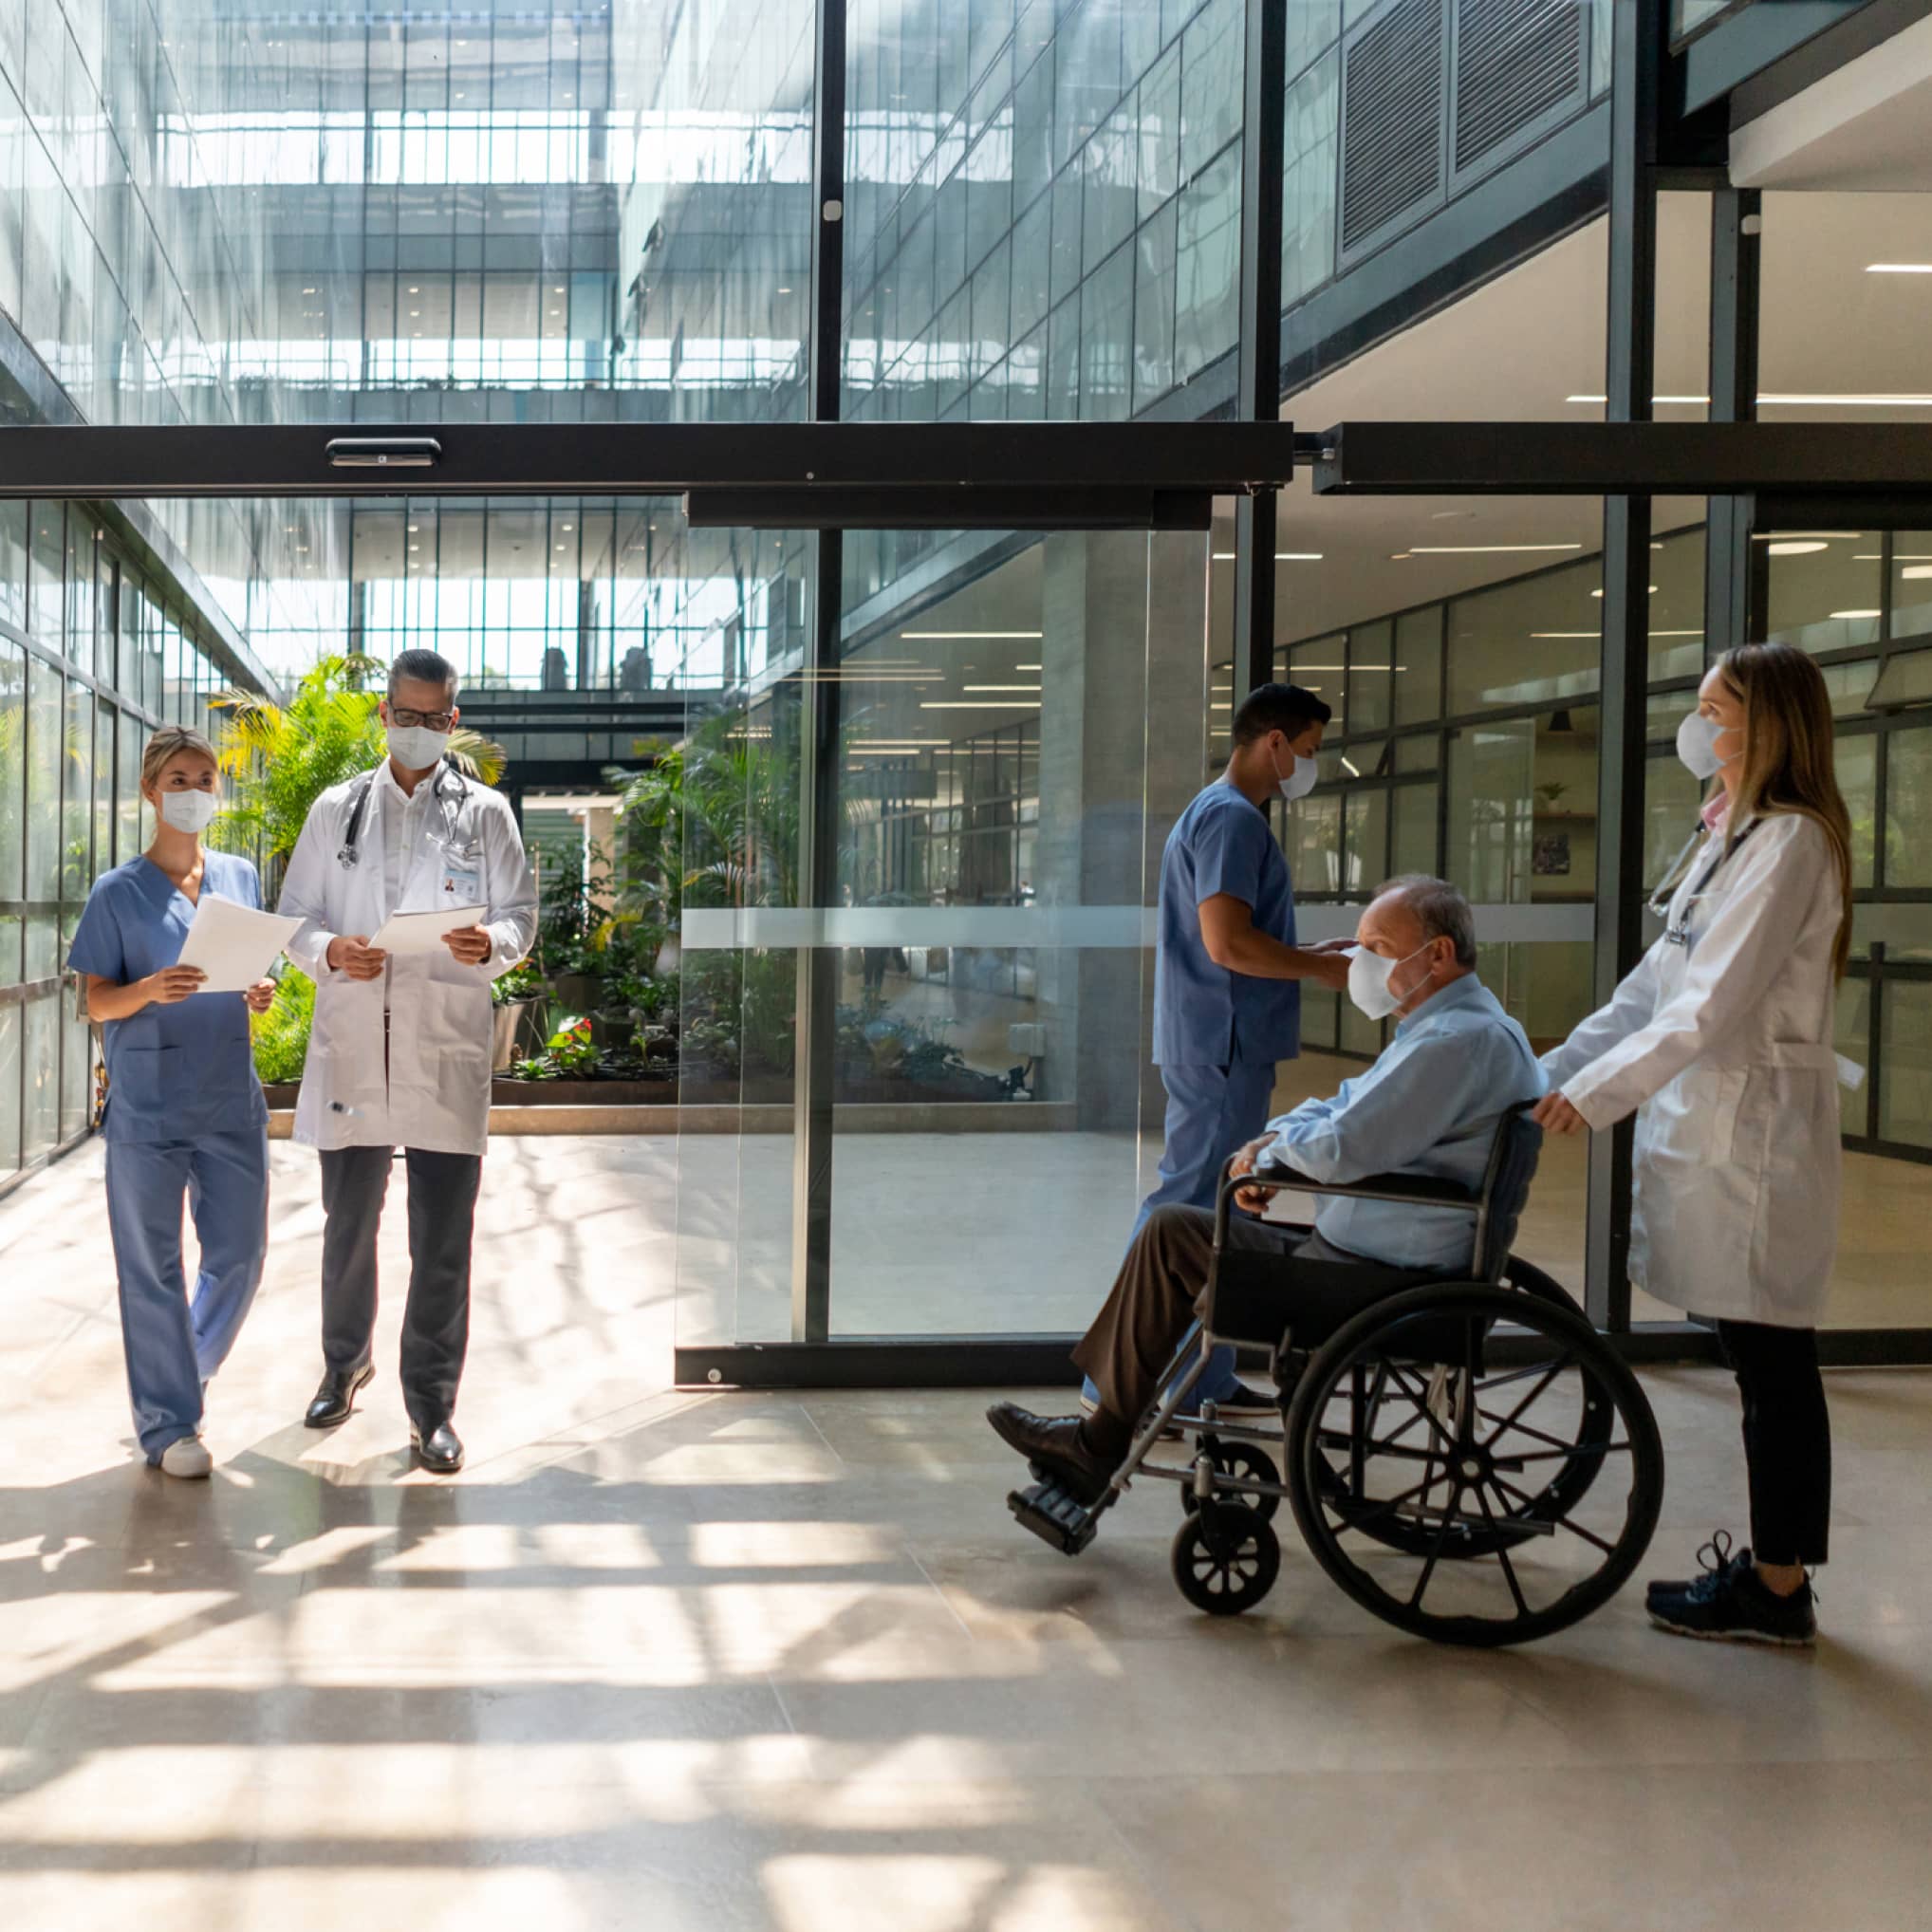 The Pandemic Resilient Hospital: How Design Can Help Facilities Stay Operational and Safe